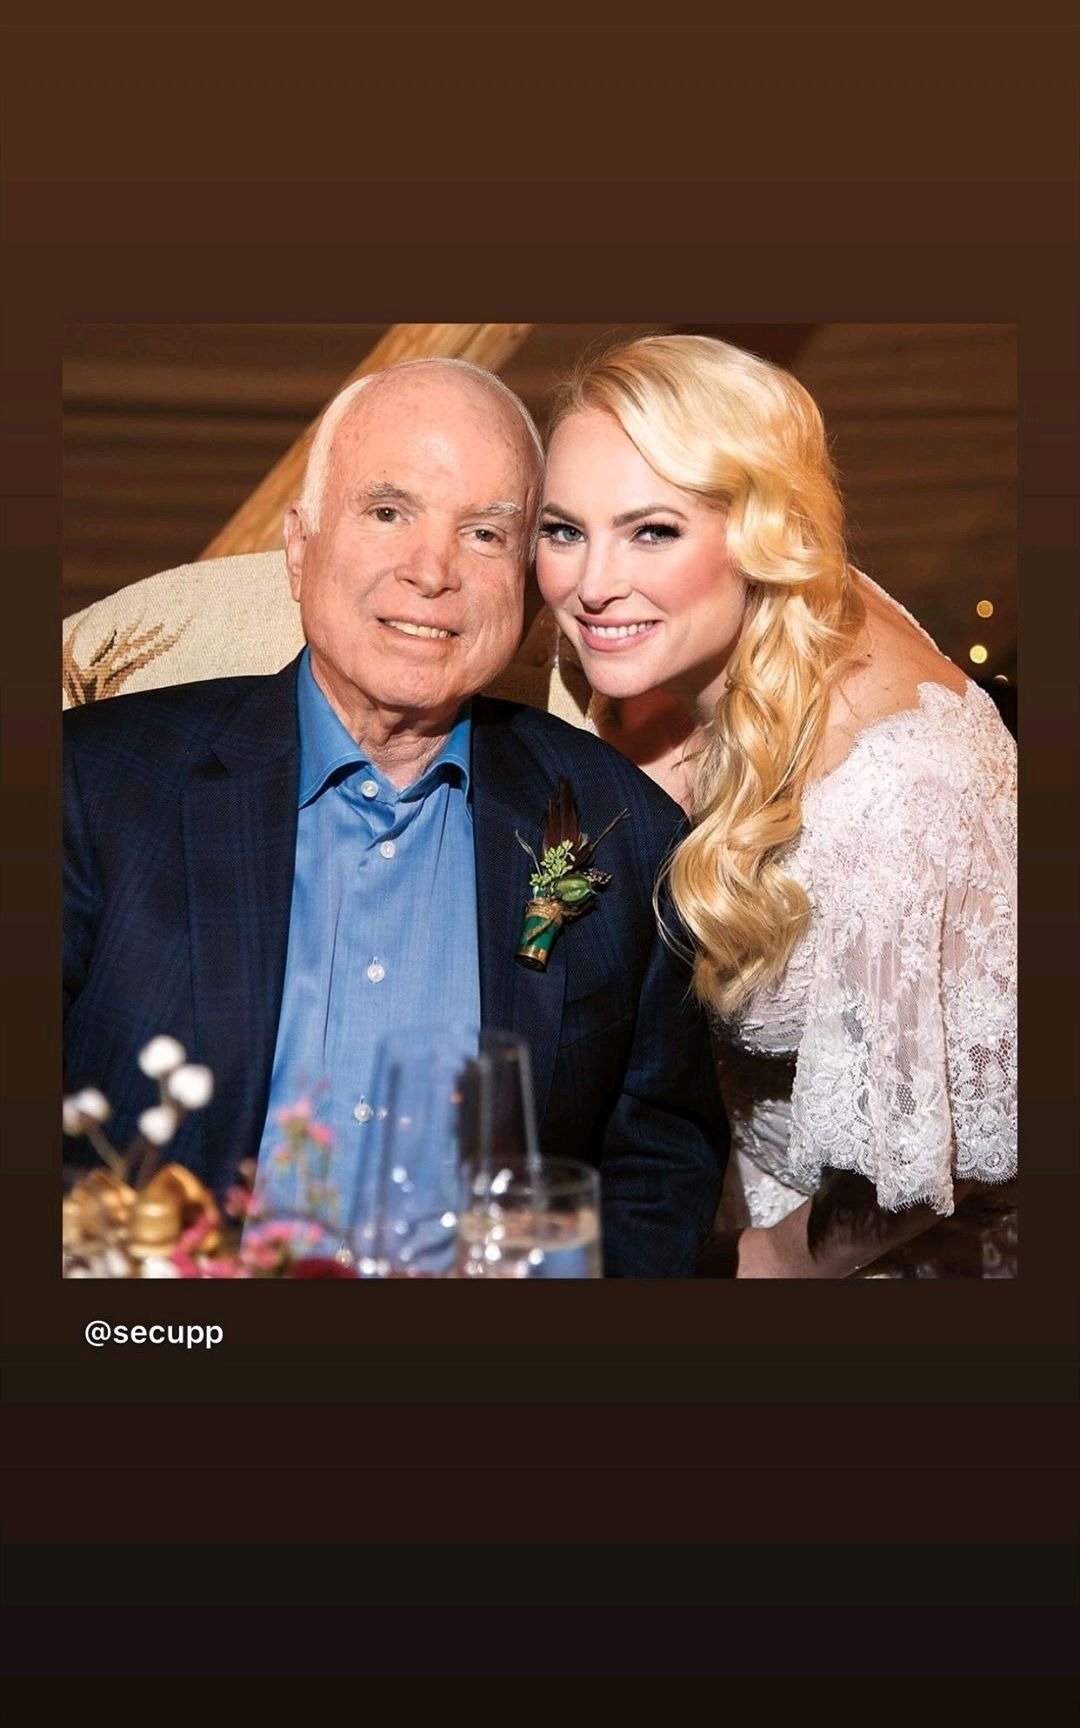 Senator McCain and daughter Meghan McCain posing together for a picture. | Instagram/@meghanmccain